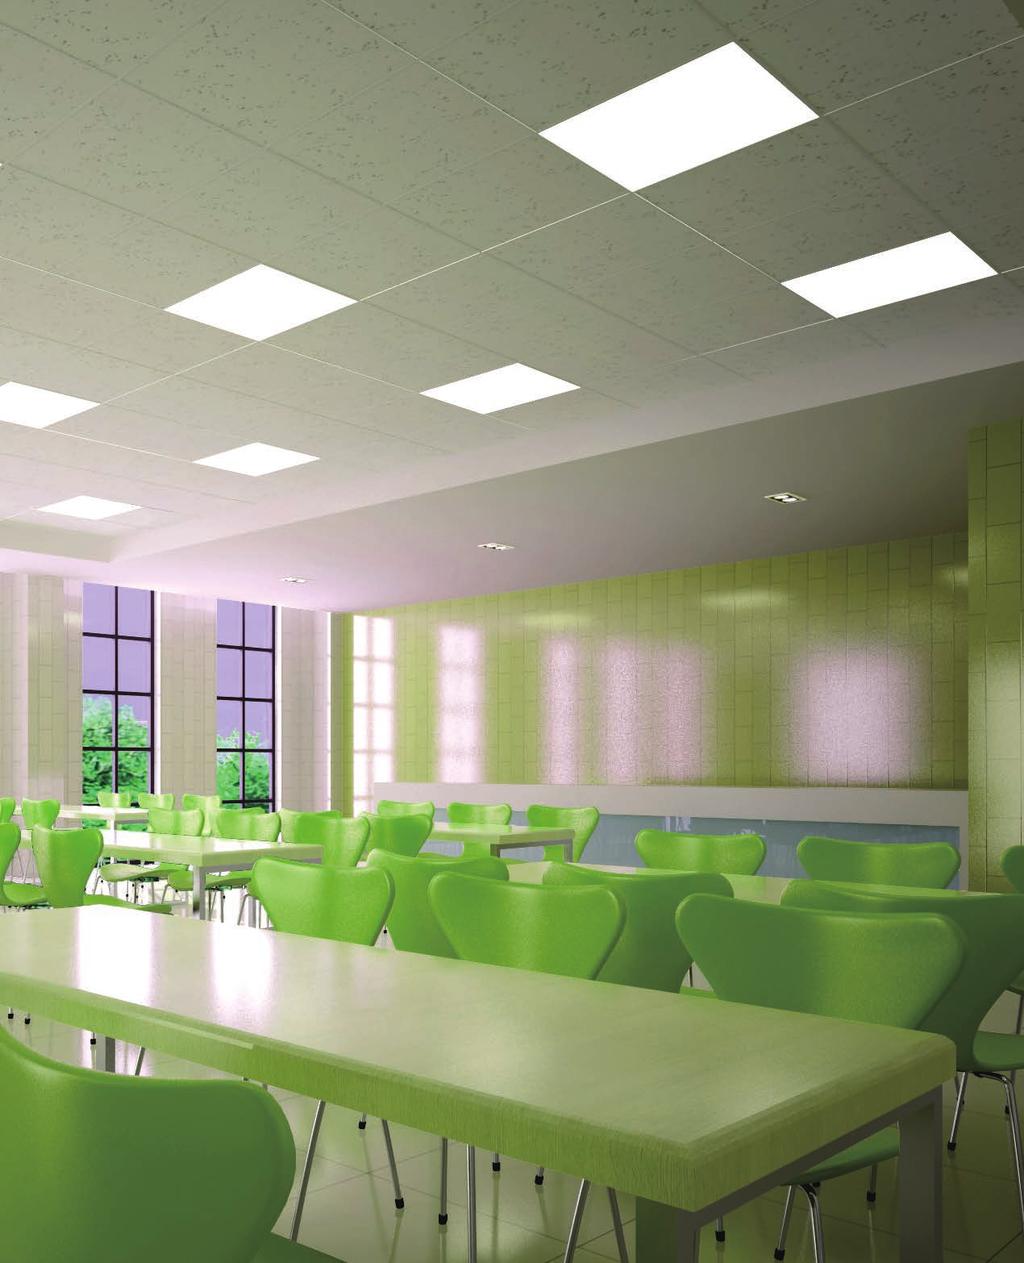 LED PNEL LIGHT Waterproof Panel Light UP-PL3030/6060-U Up-shine waterproof panel is a complementary for the existing